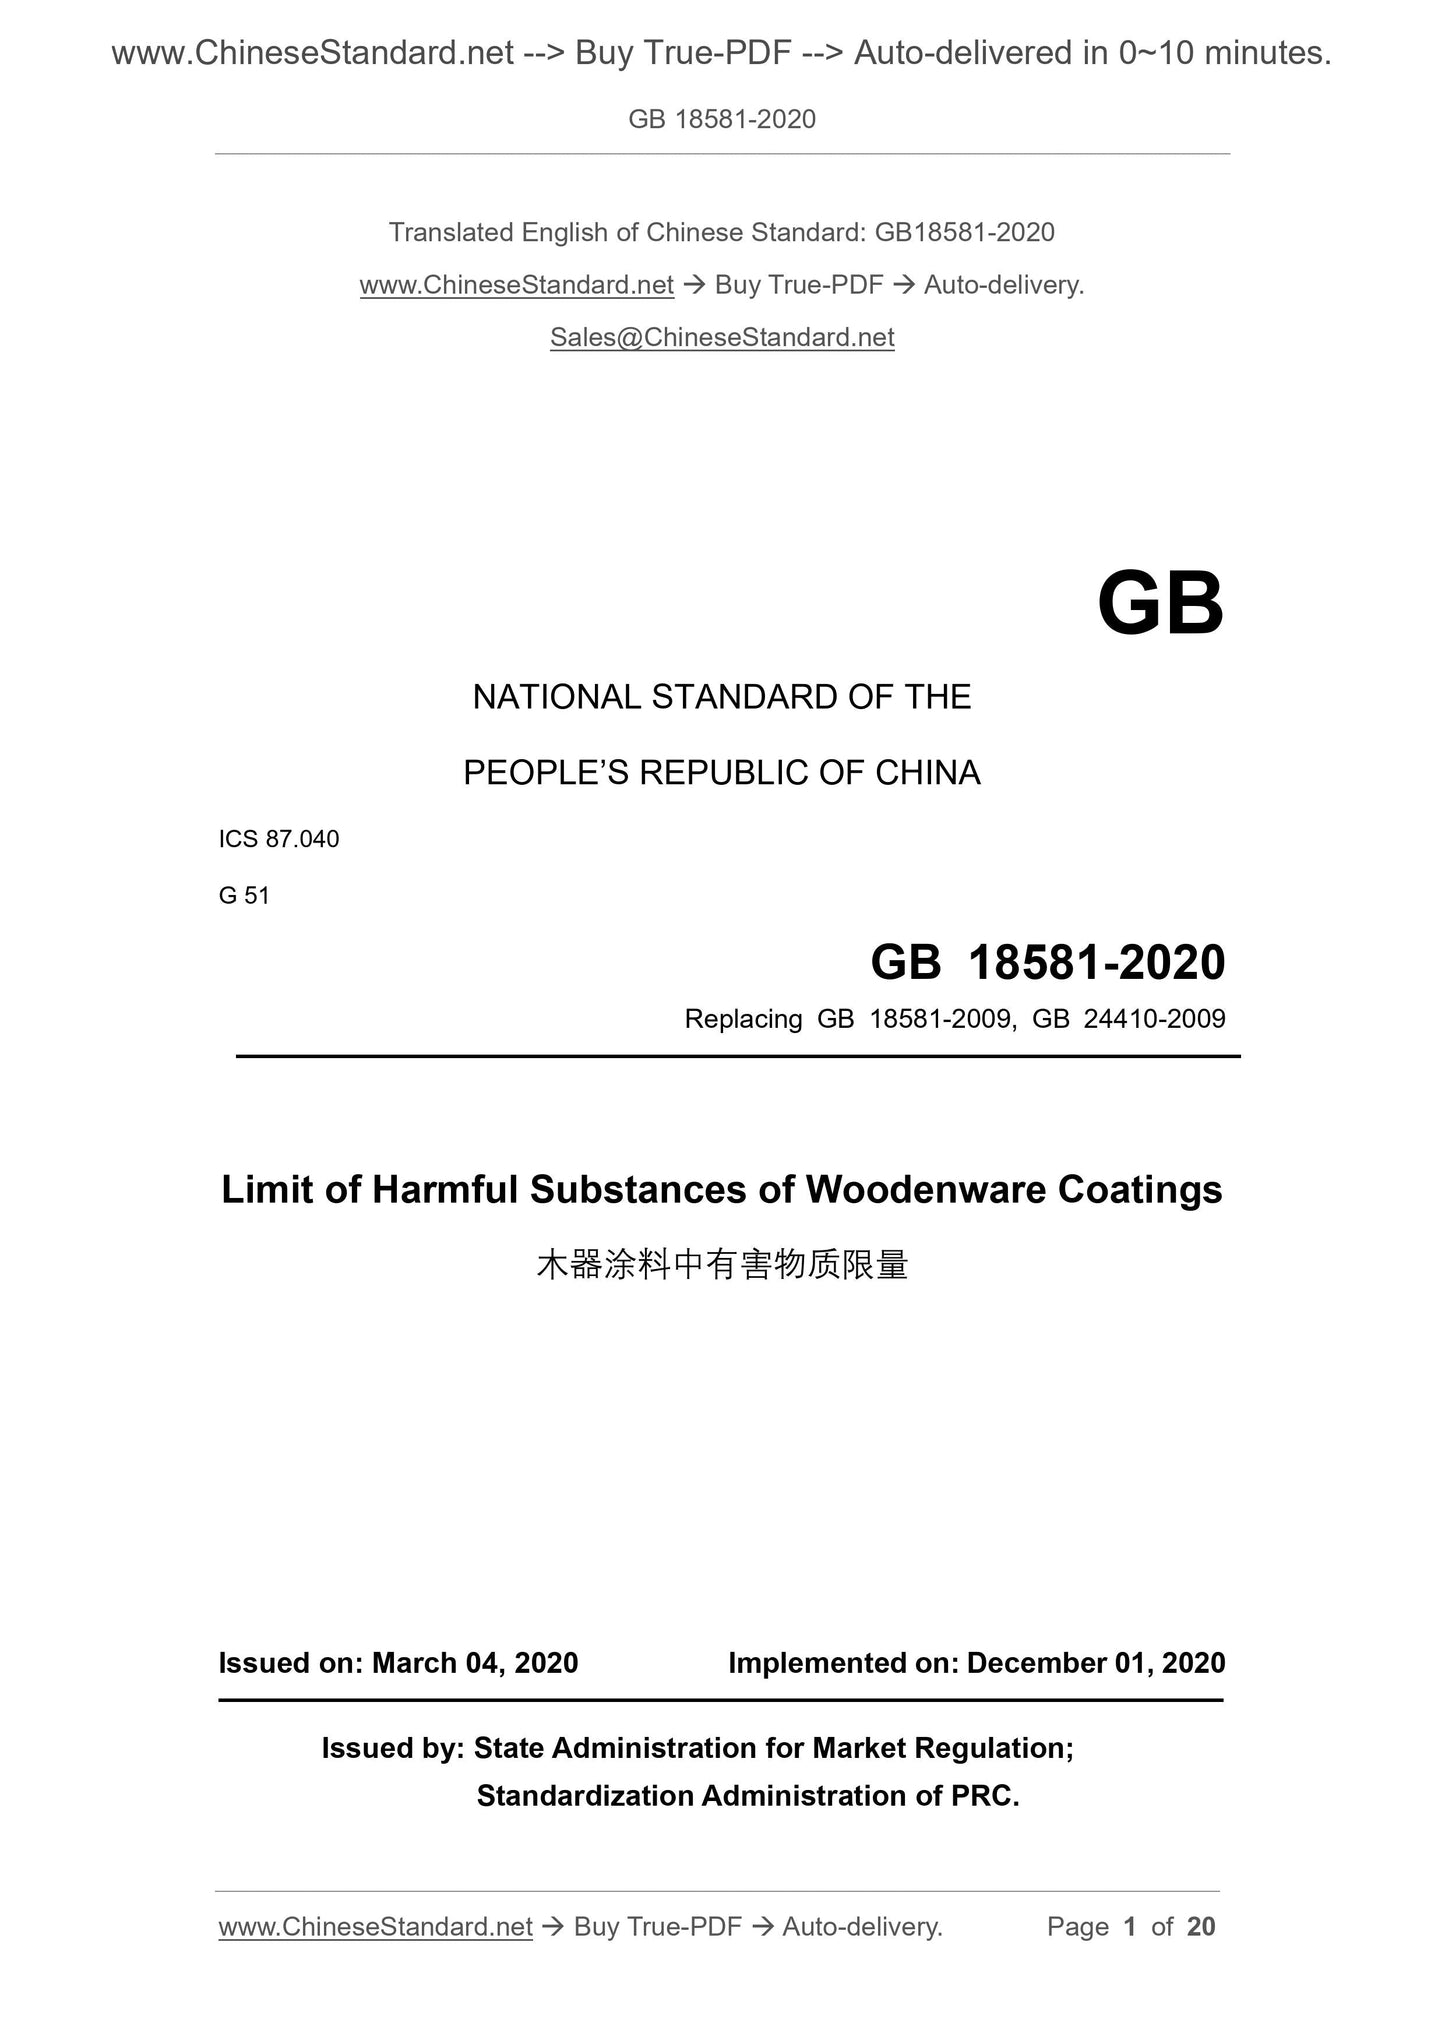 GB 18581-2020 Page 1